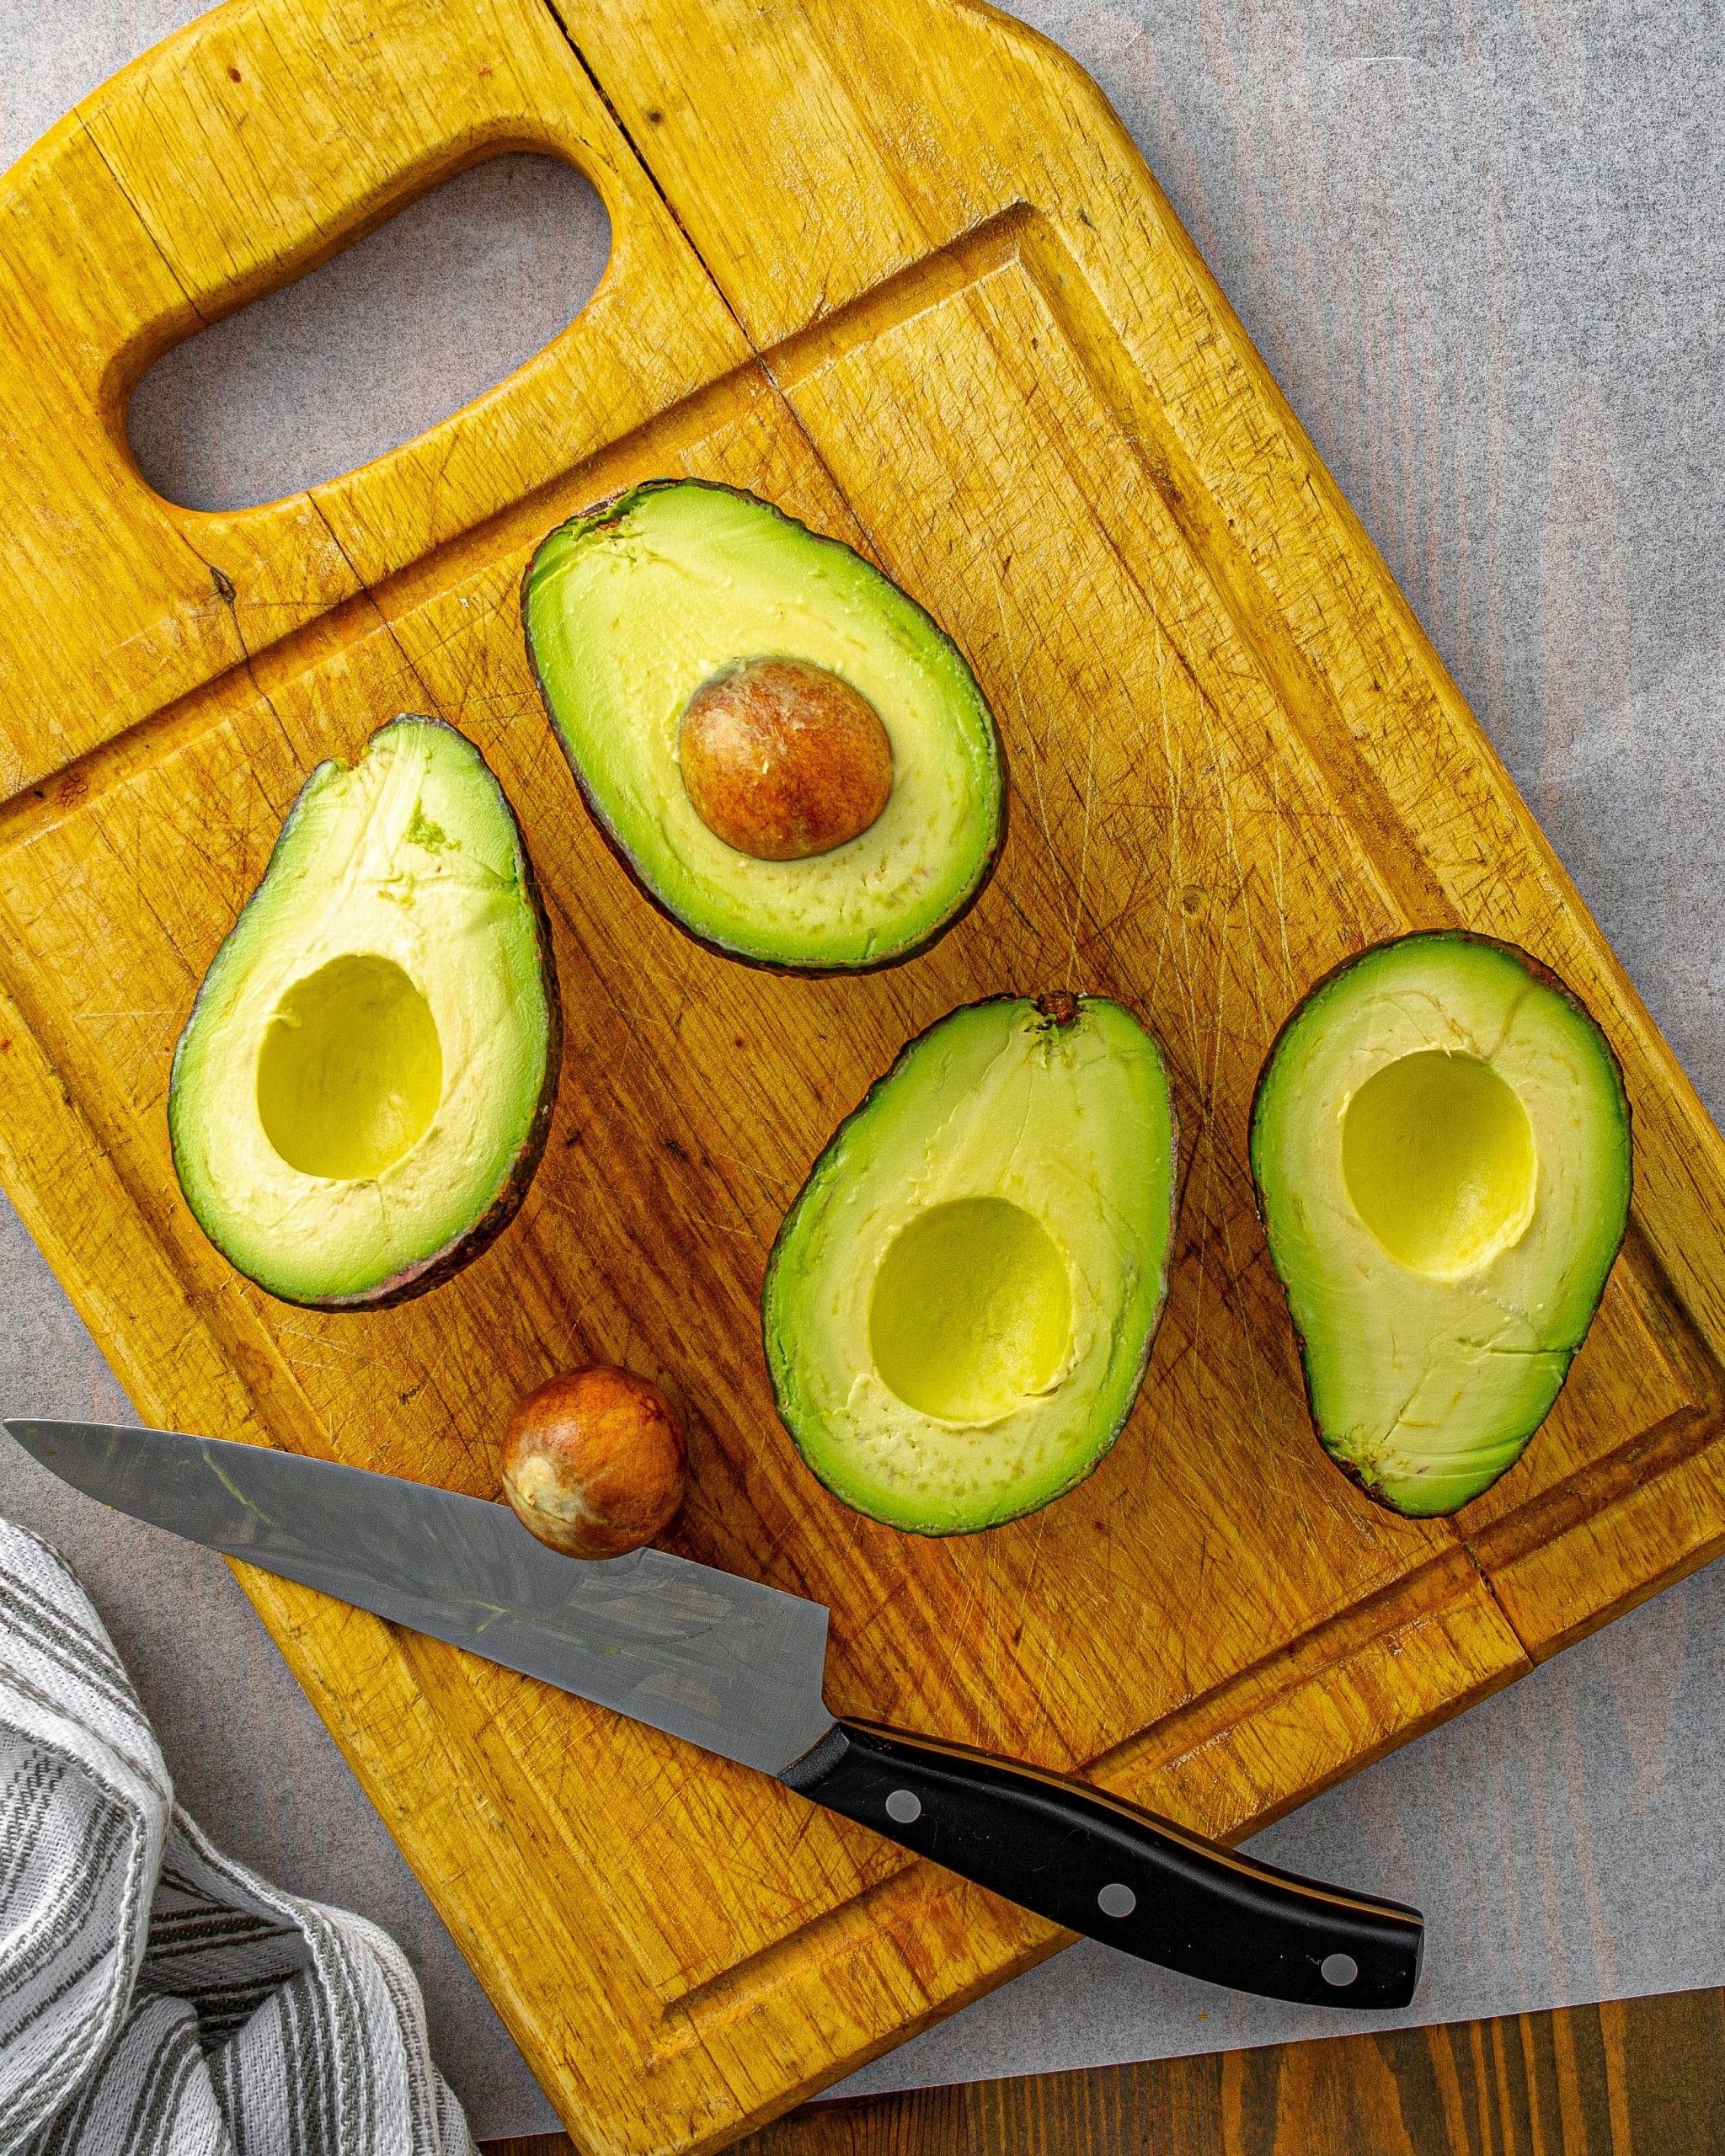 Cut the avocados in half lengthwise and remove the pit.